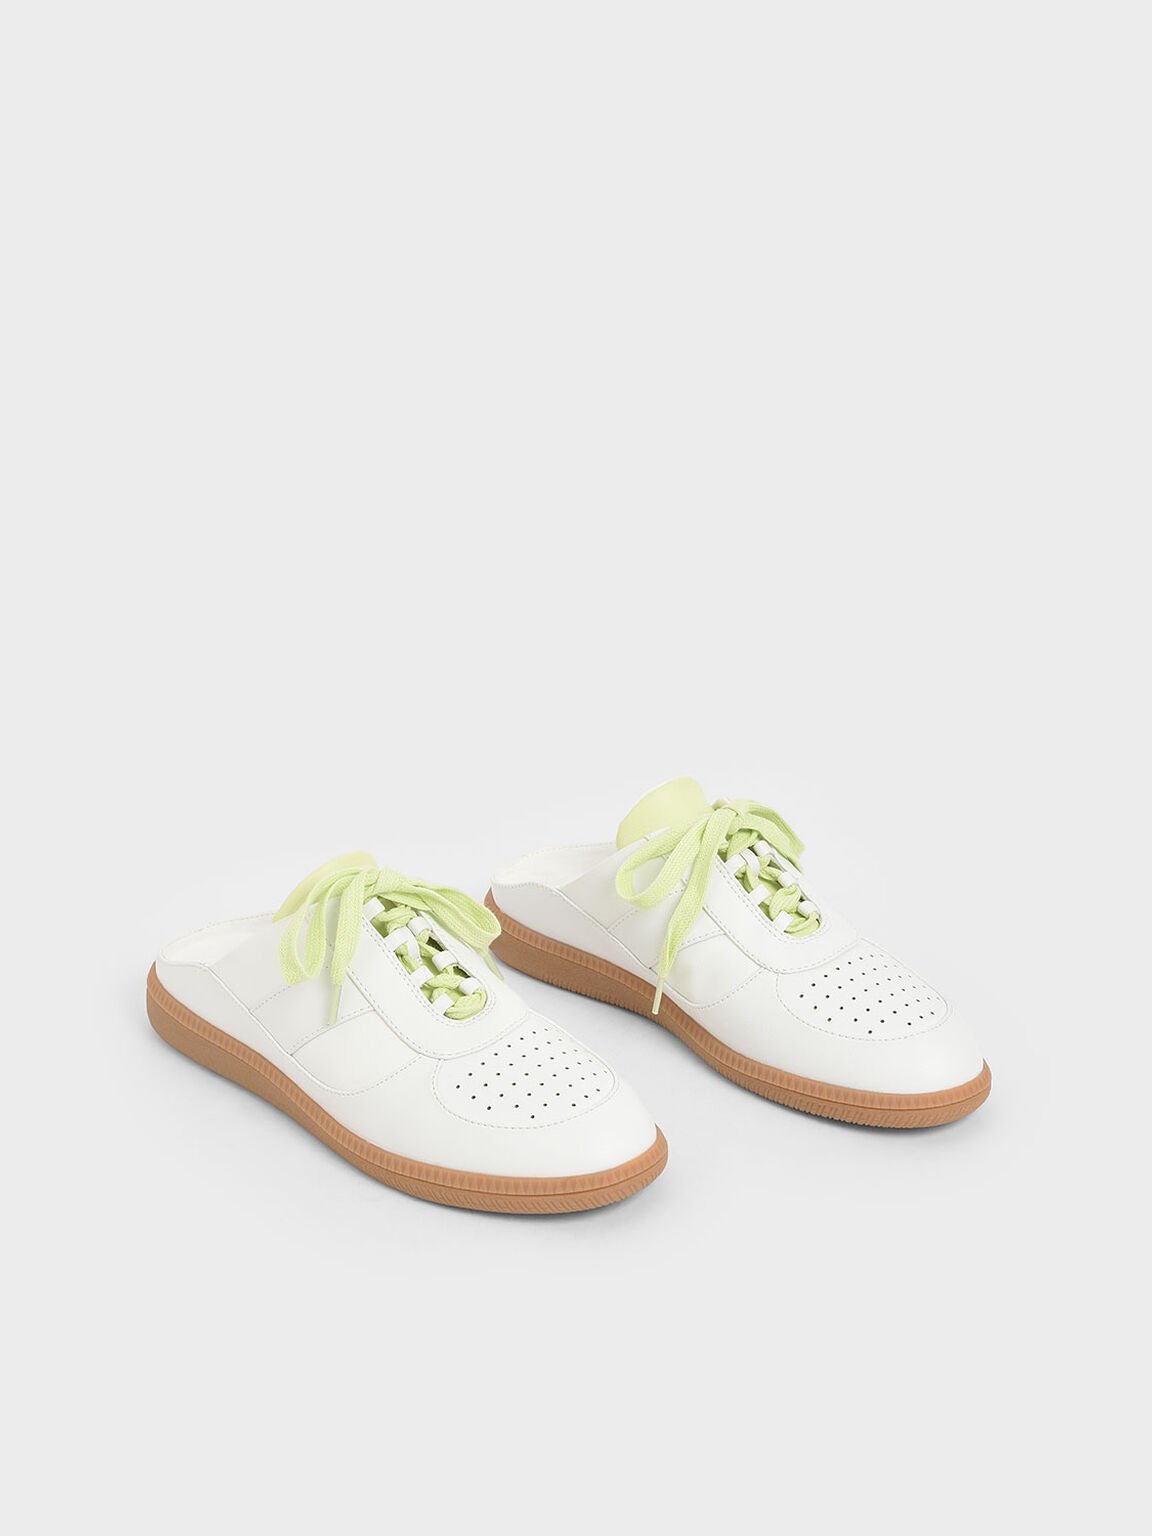 Lace Up Sneaker Mules, White, hi-res